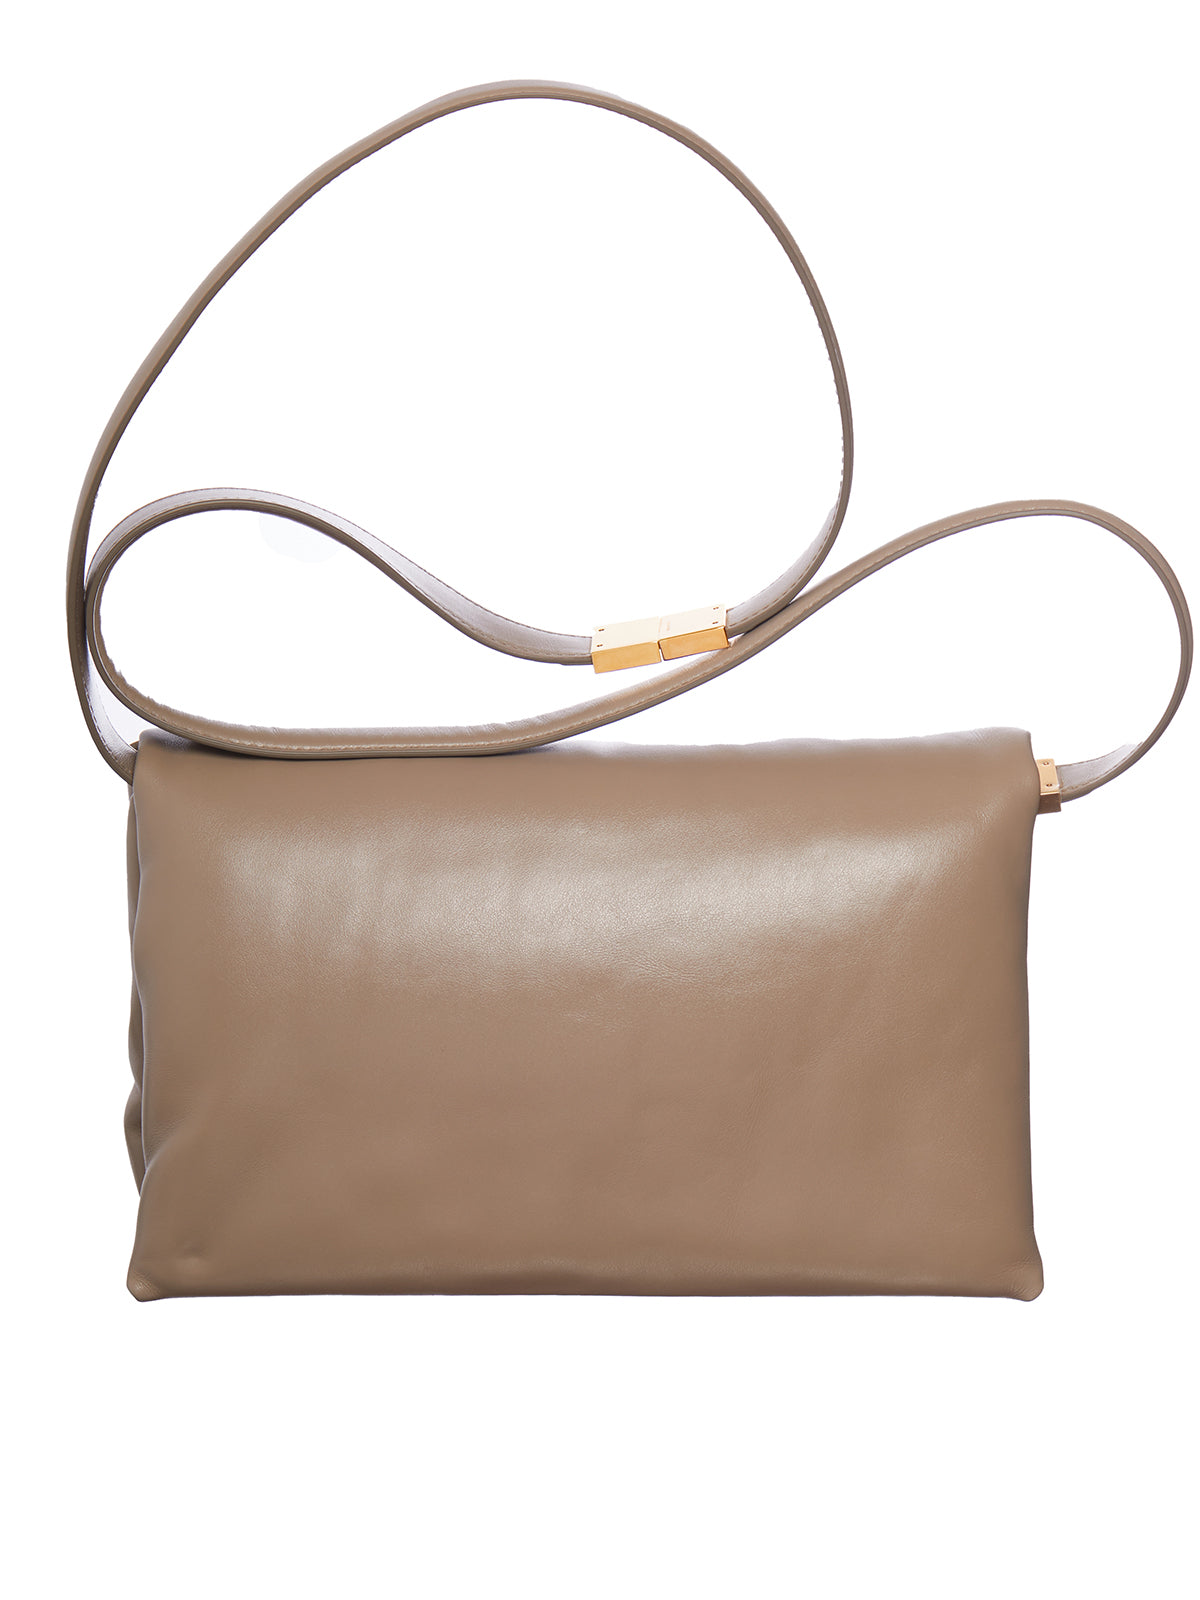 MARNI Beige Leather Clutch for Women - Carry All Your Essentials in Style!